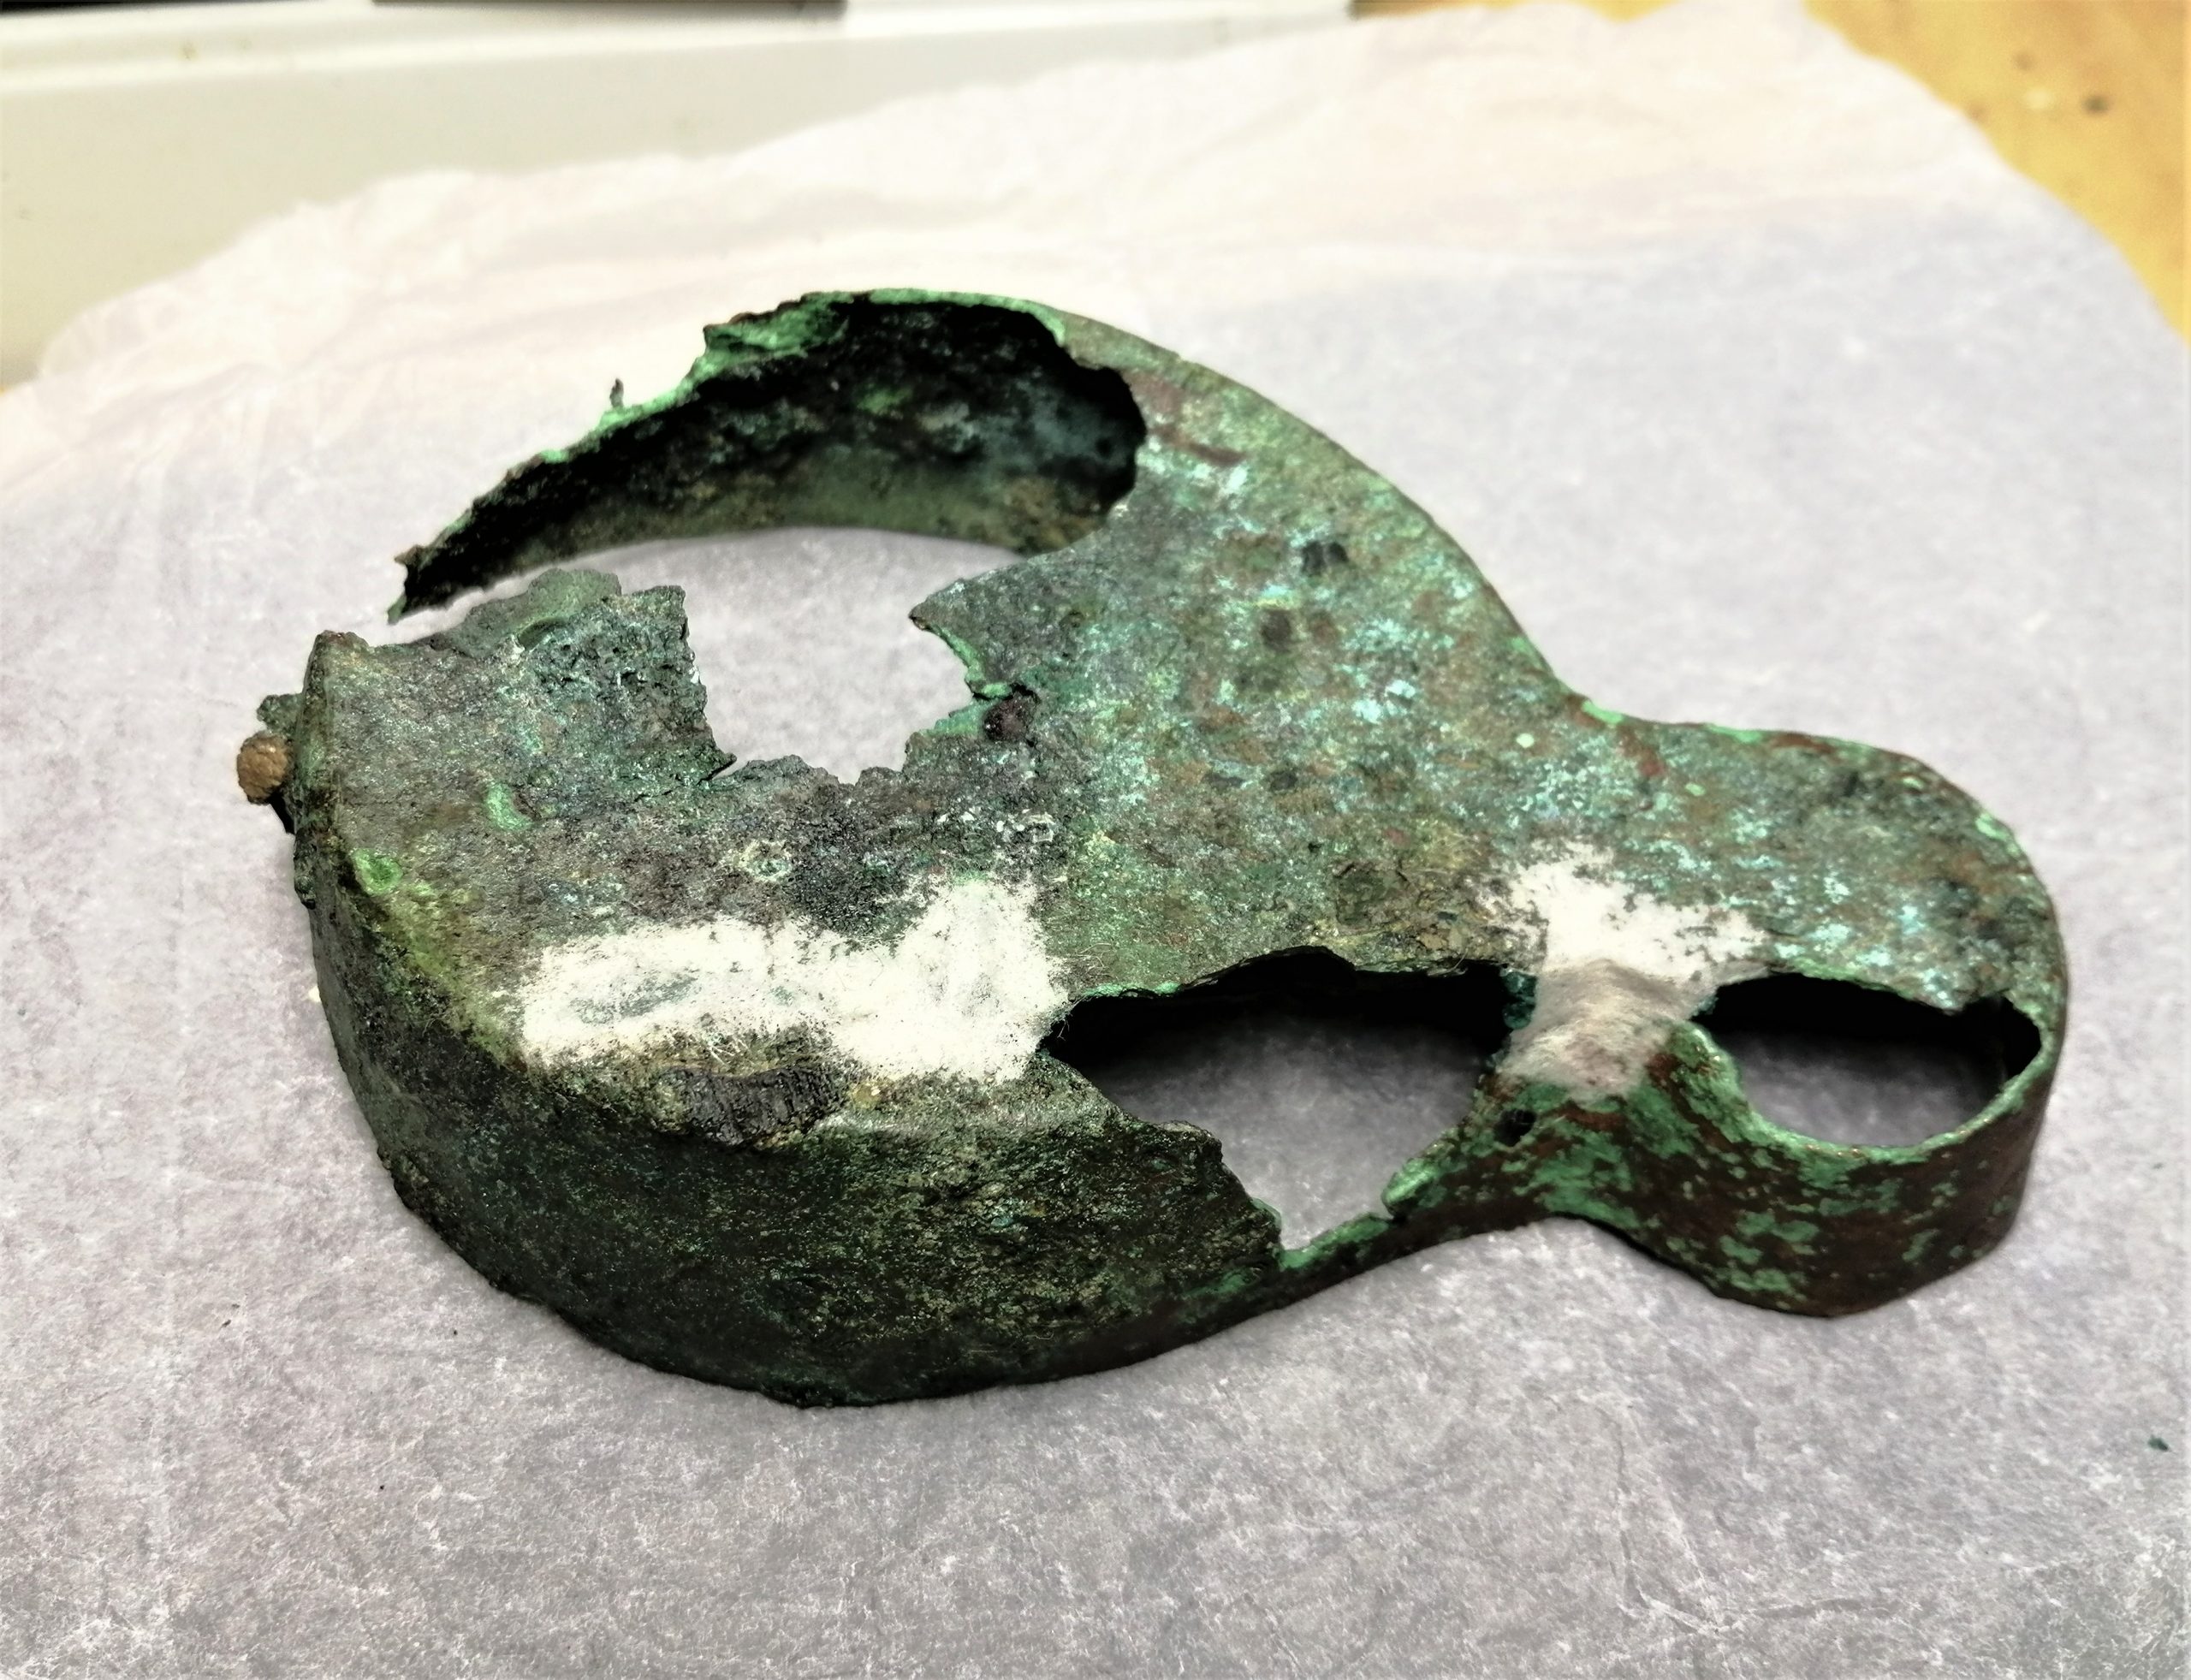 The process of infilling and colour matching on a corroded Roman bronze lamp.